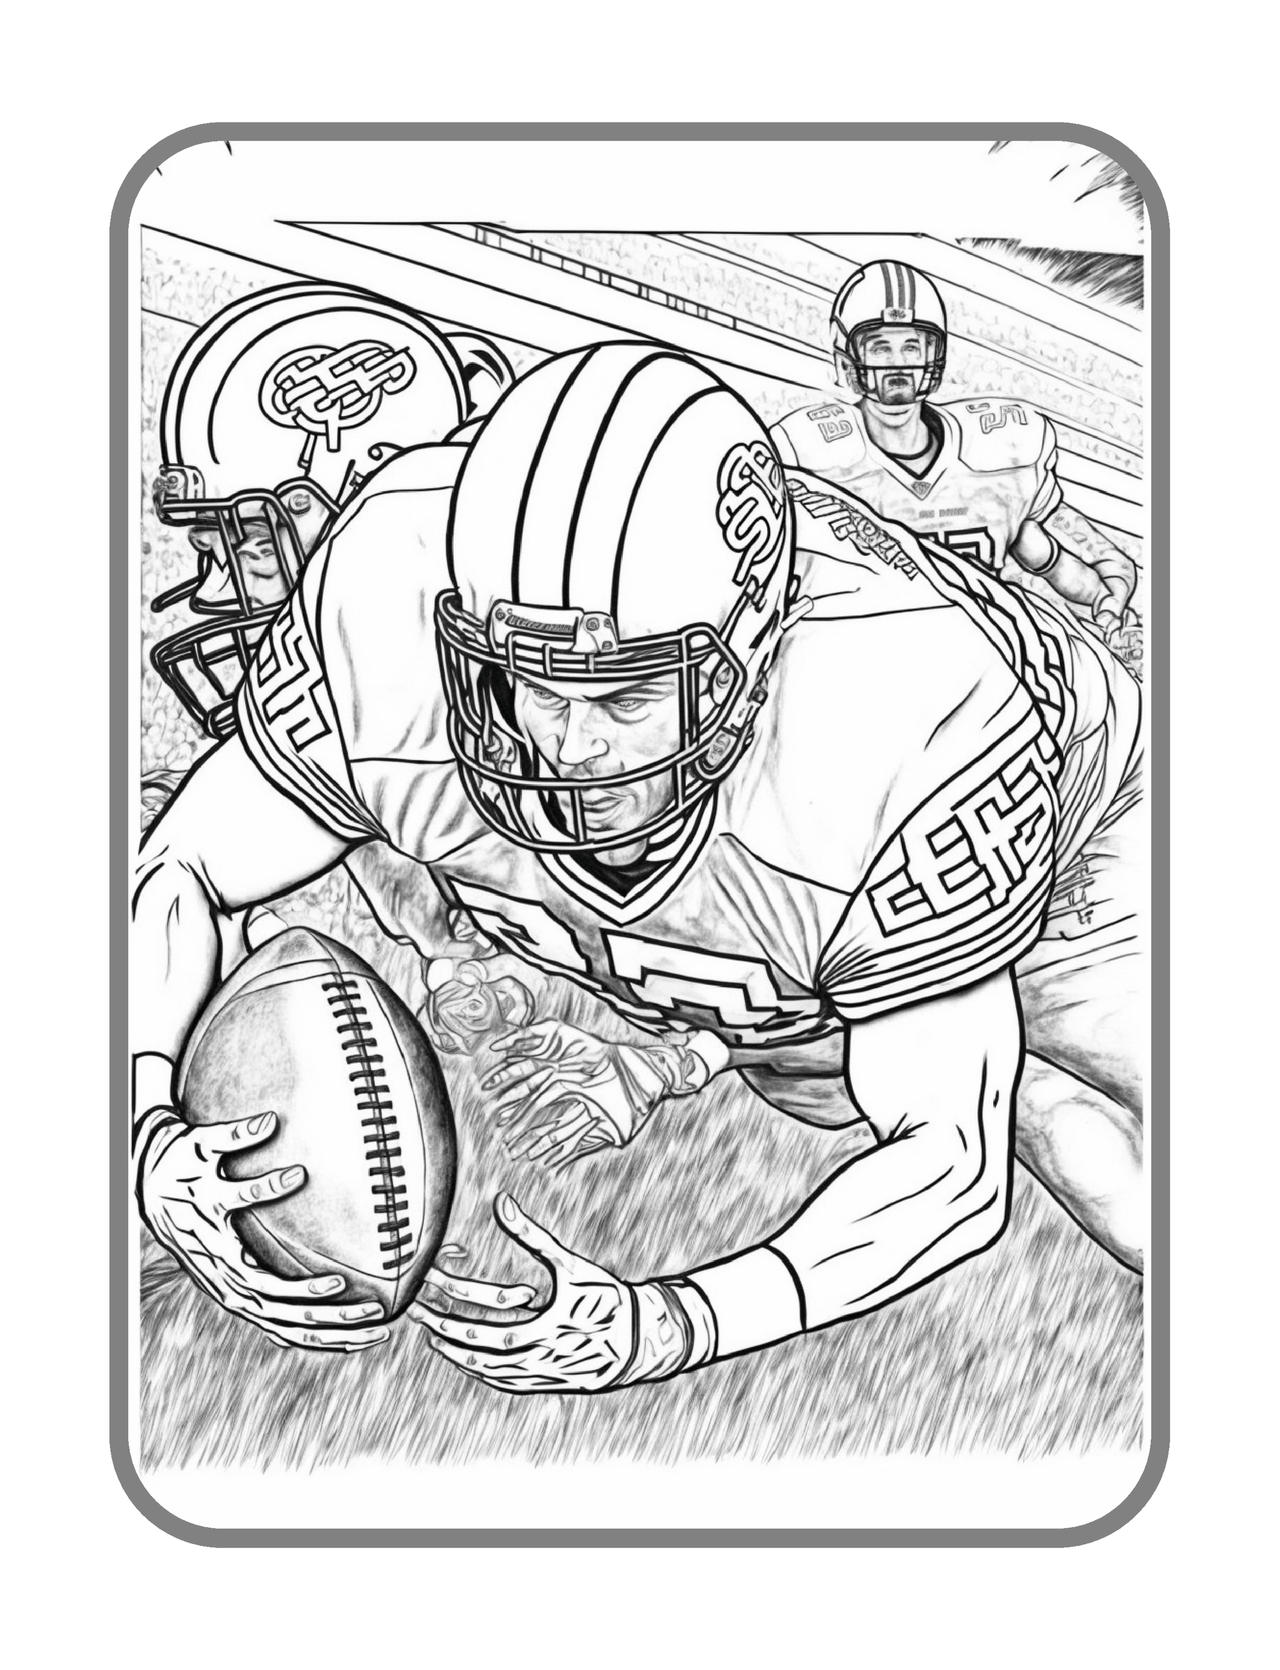 Football Coloring Book for Women Graphic by plrwithease · Creative Fabrica